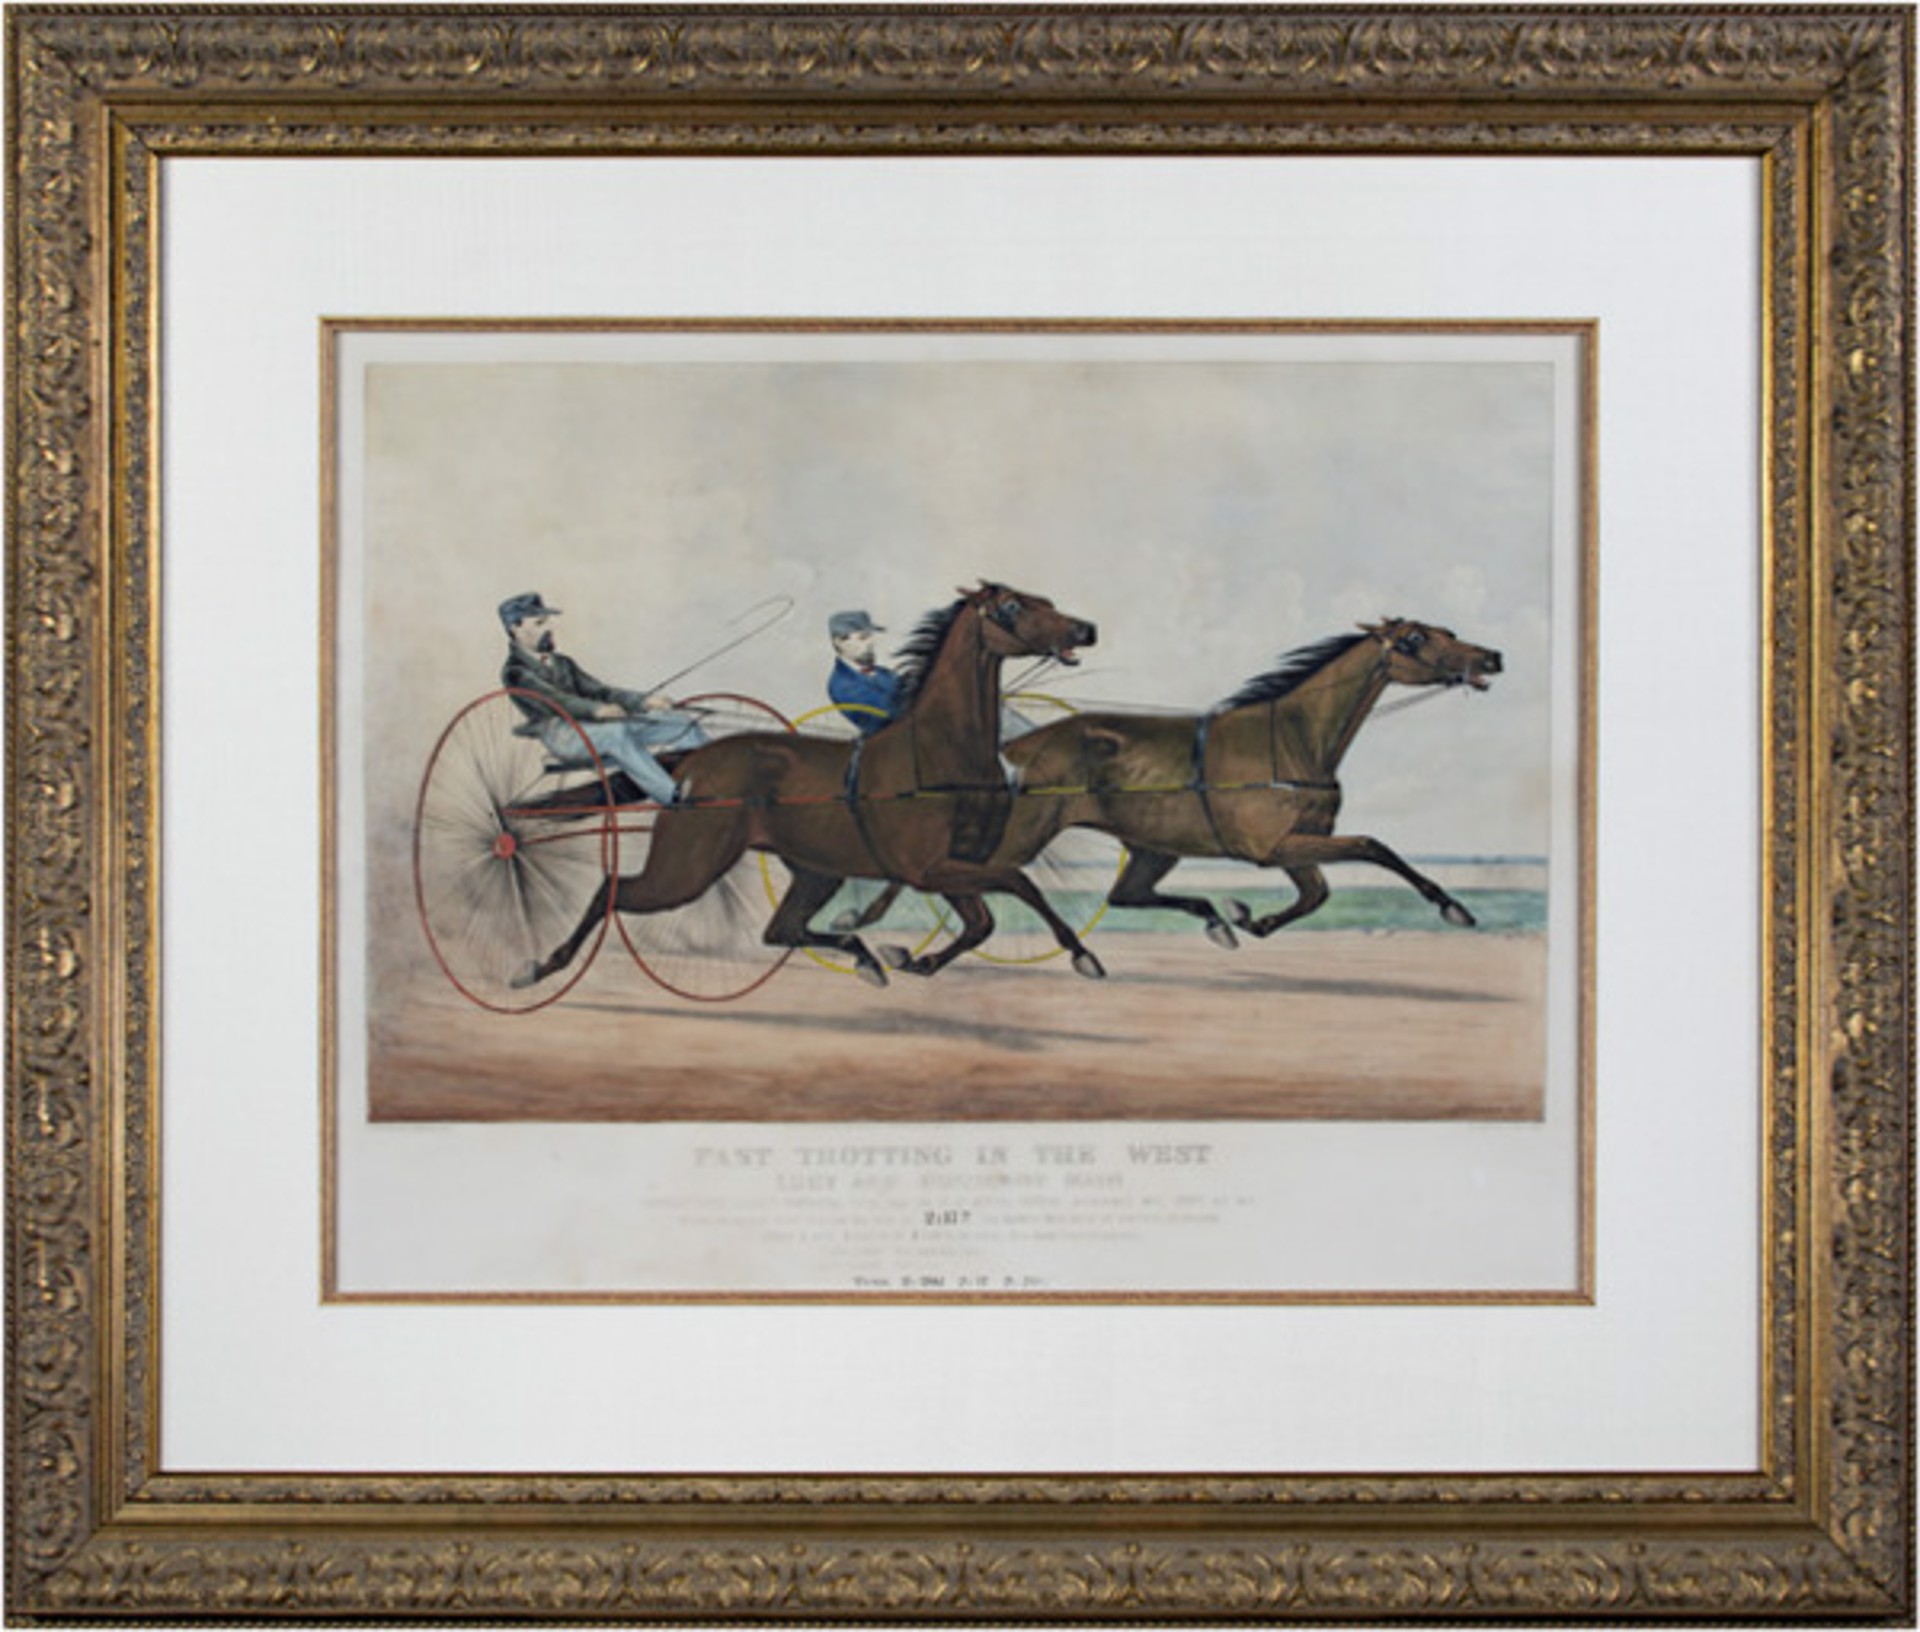 Fast Trotting in the West (Milwaukee Race) by Currier & Ives